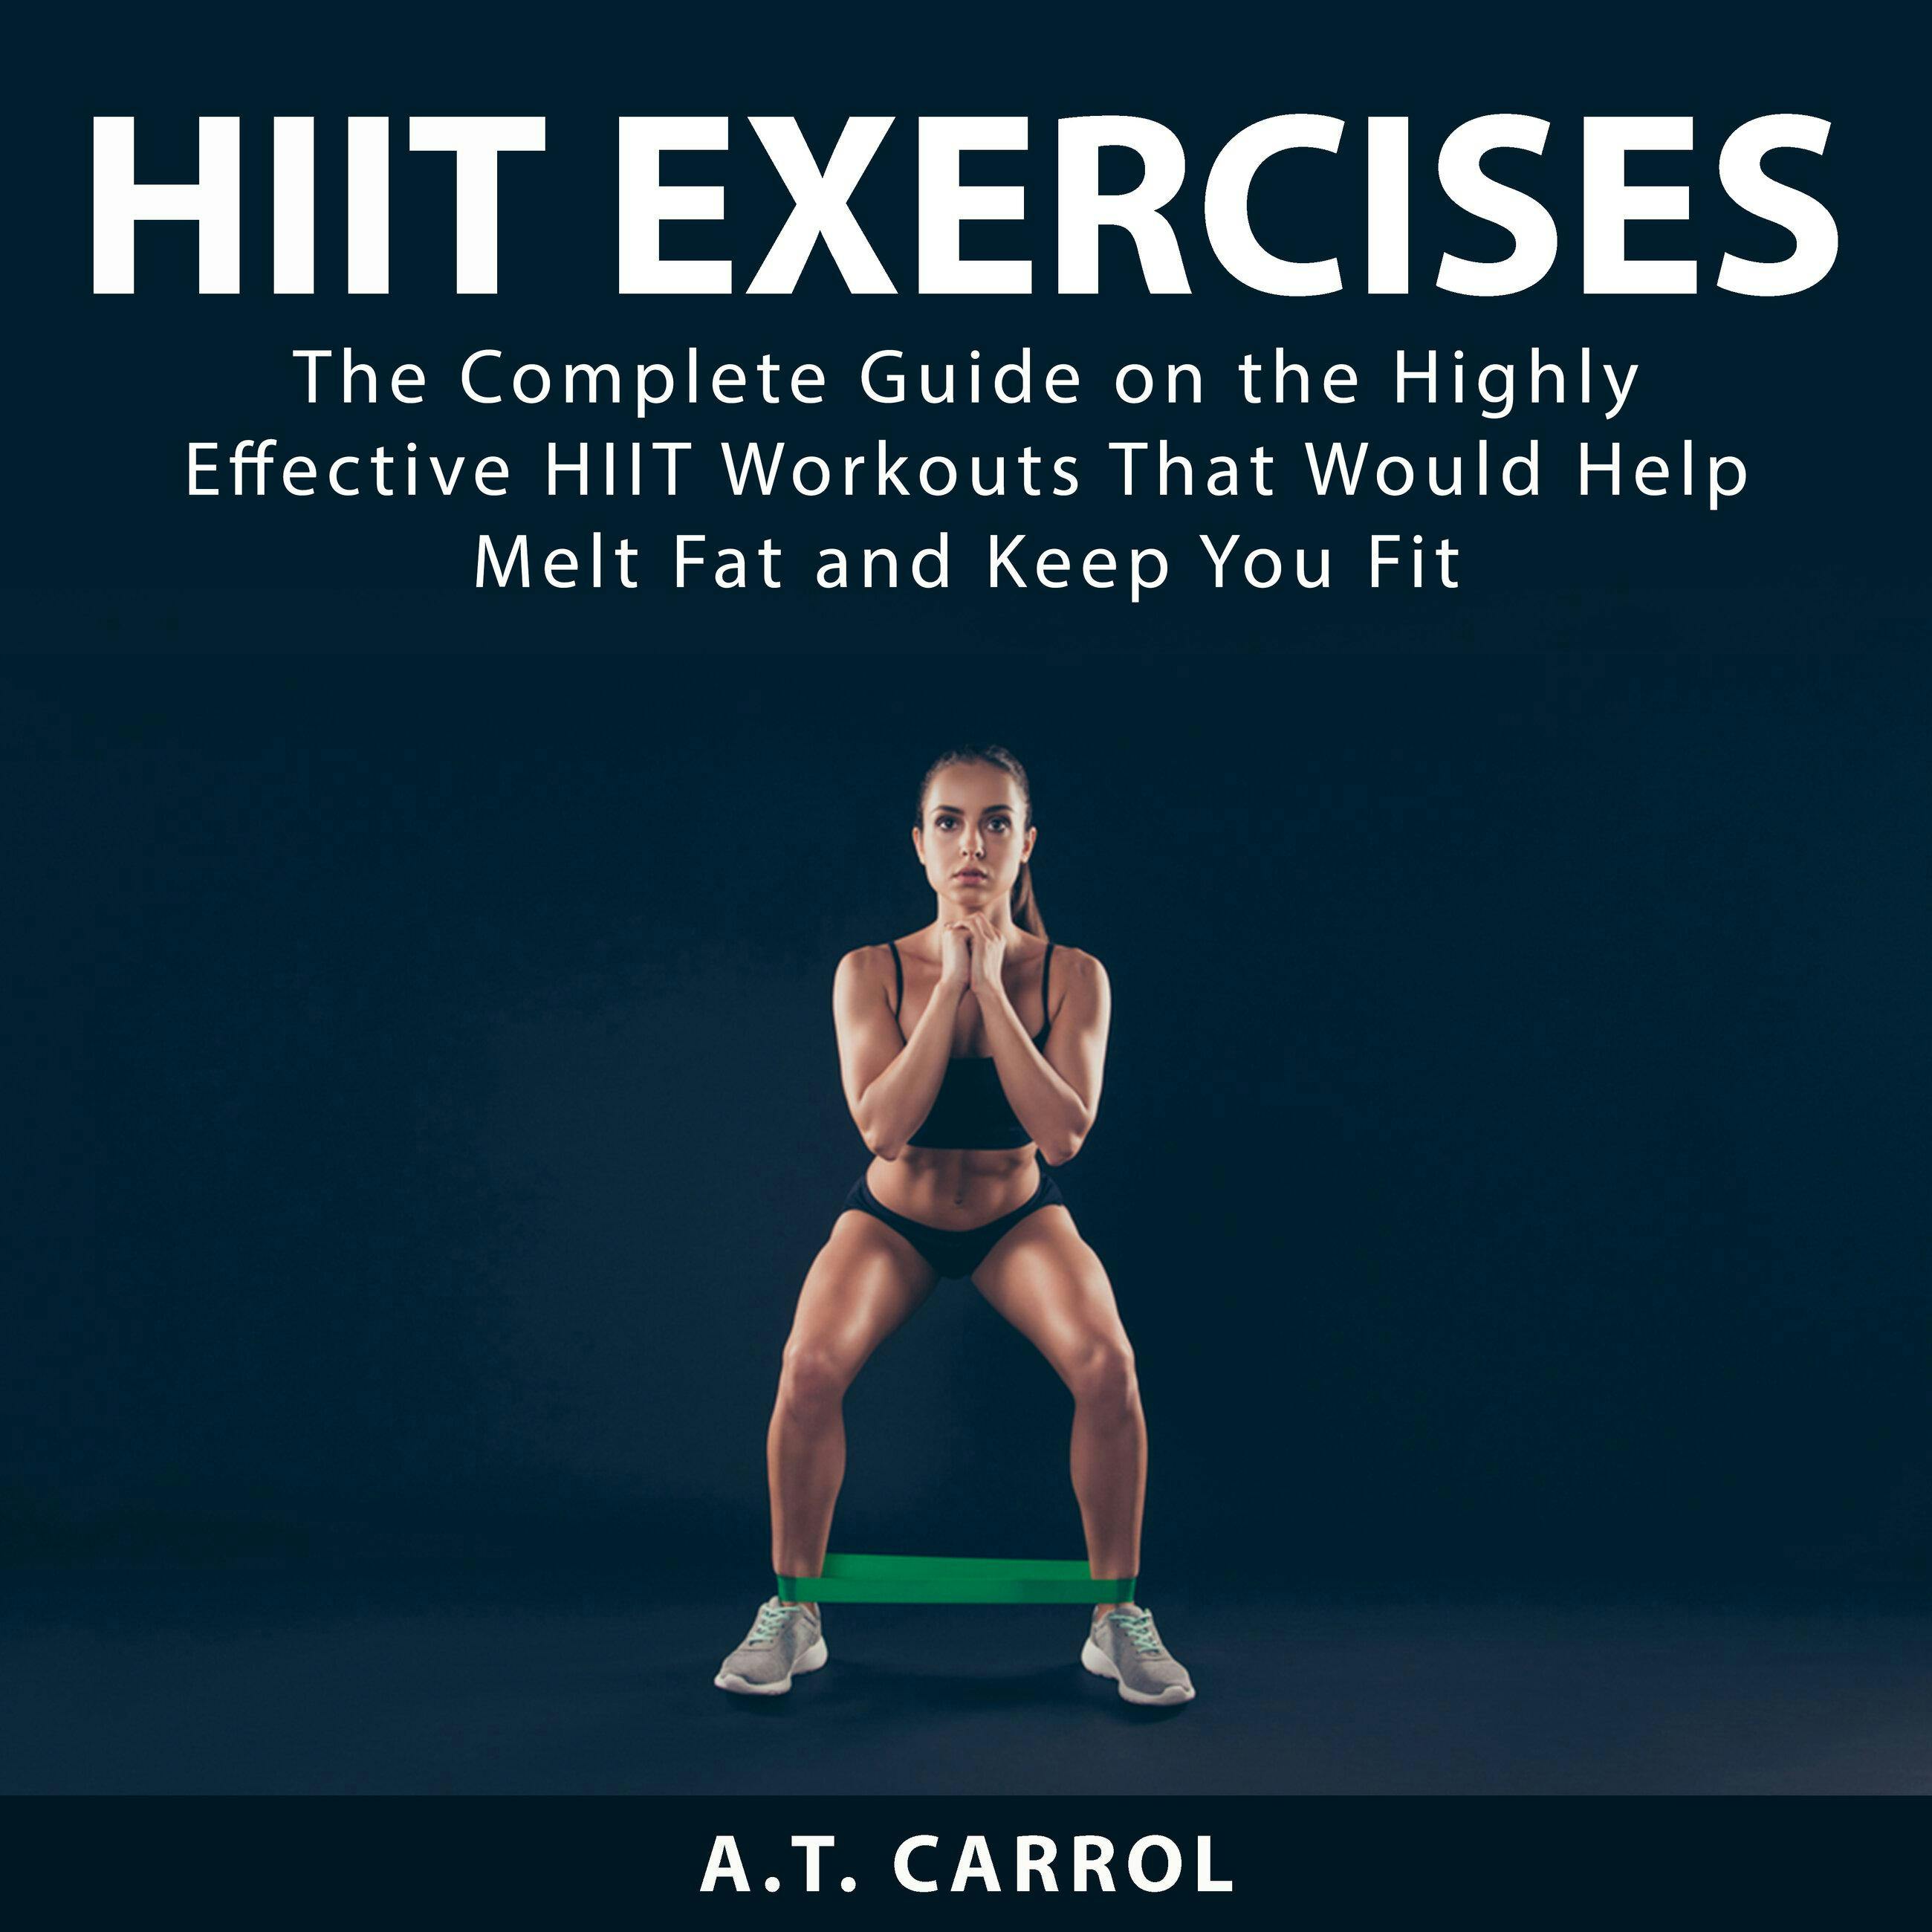 HIIT Exercises: The Complete Guide on the Highly Effective HIIT Workouts That Would Help Melt Fat and Keep You Fit - A.T. Carrol